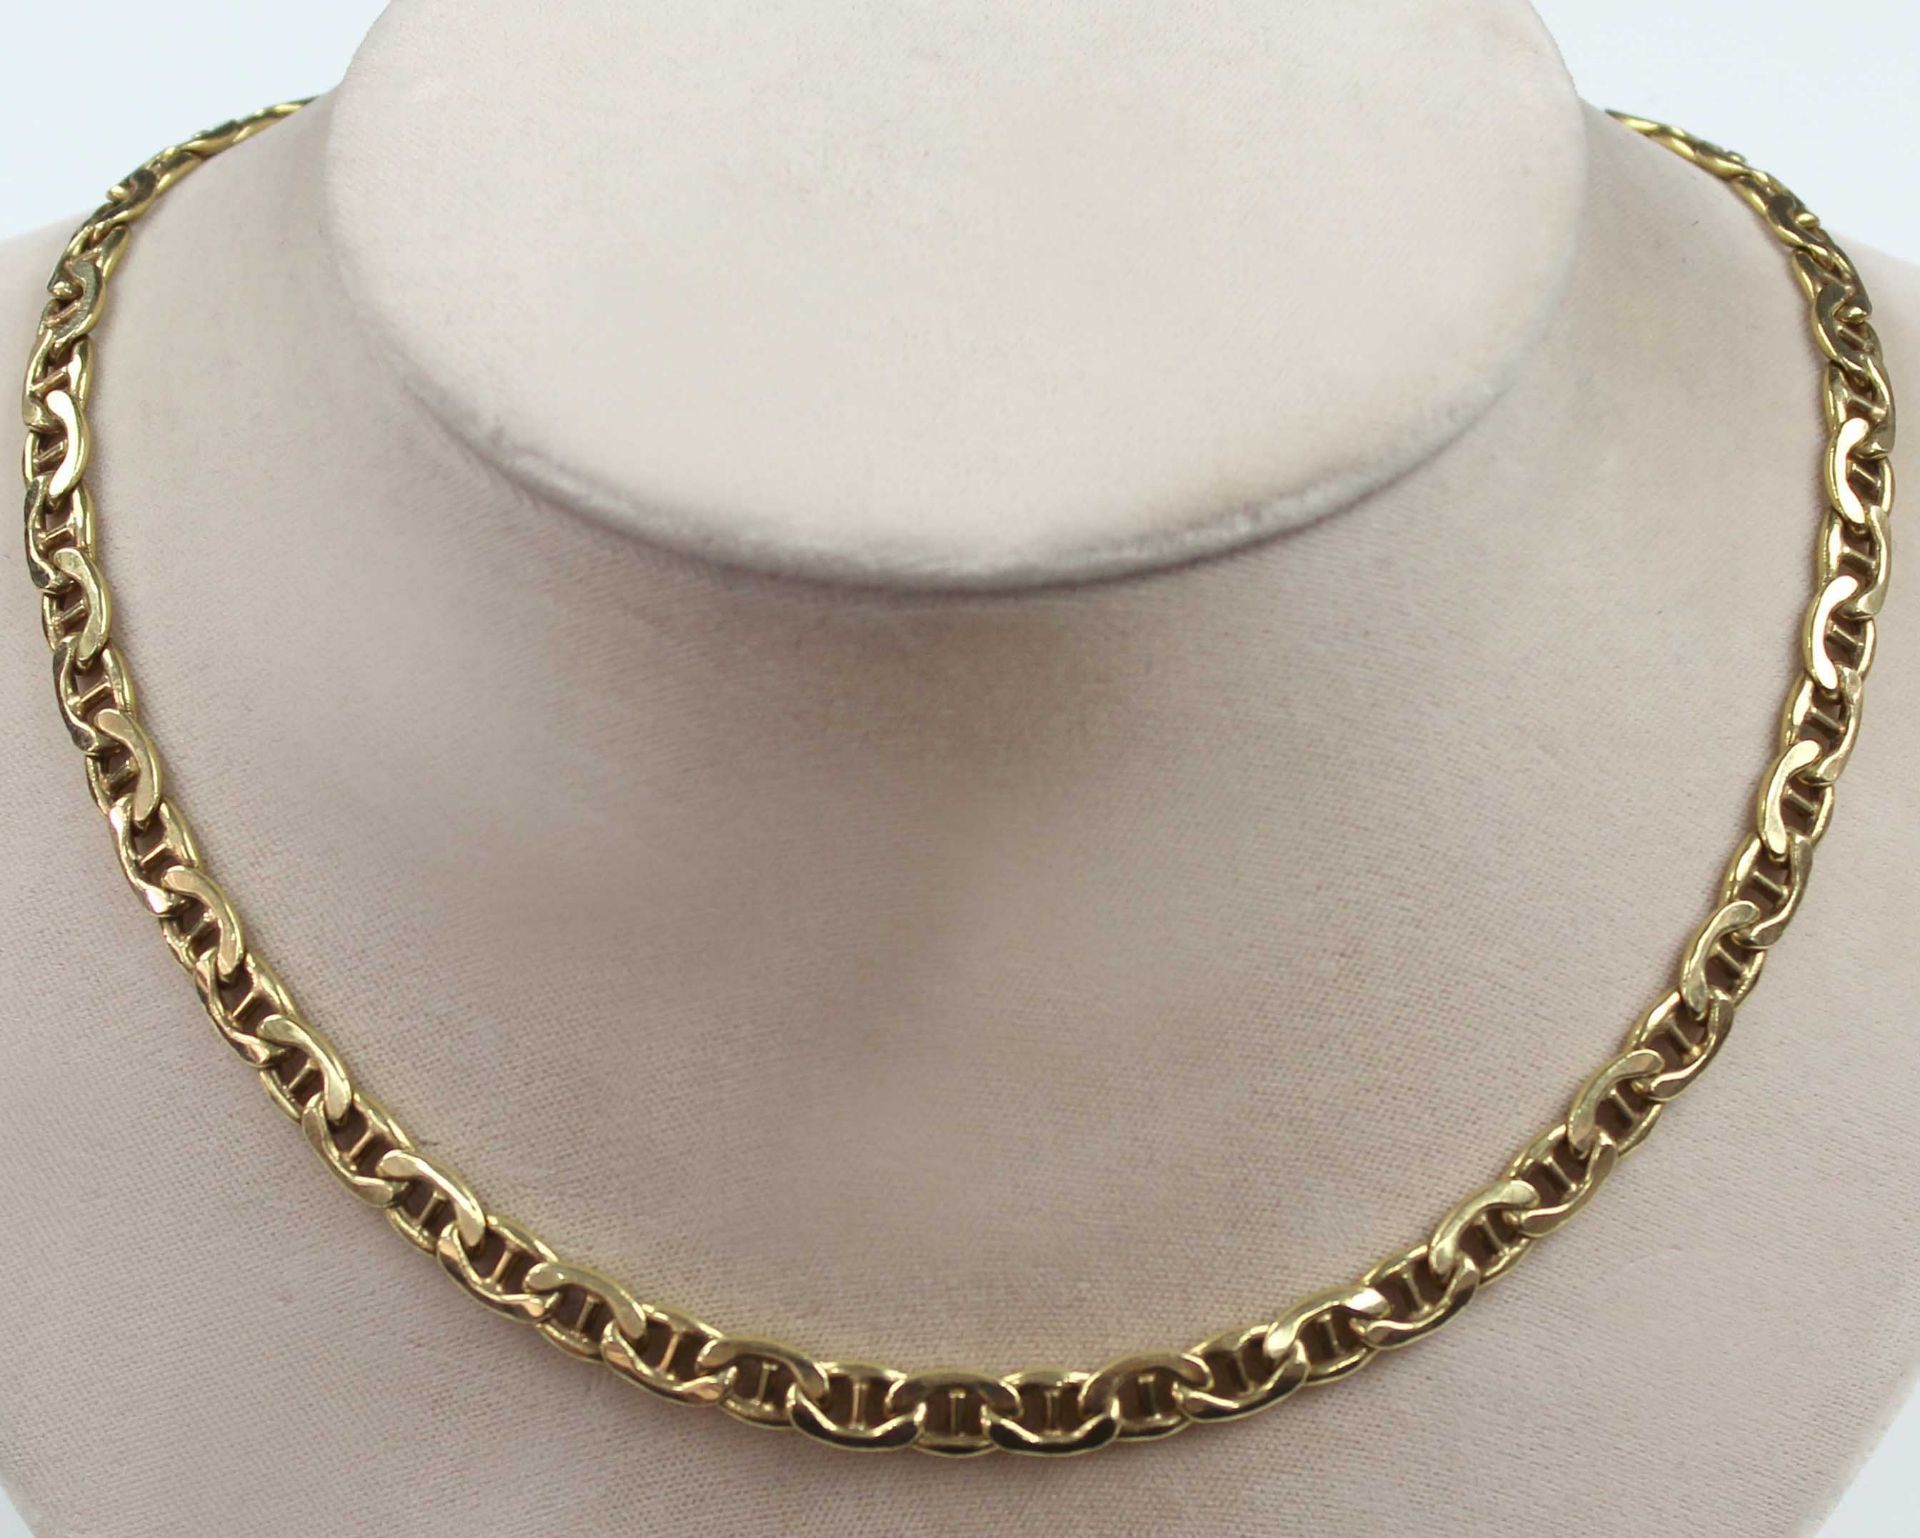 Panzer Kette. Collier. Gelb Gold 750.33,3 Gramm. 50 cm lang.Necklace. Yellow gold 750.33.3 grams. 25